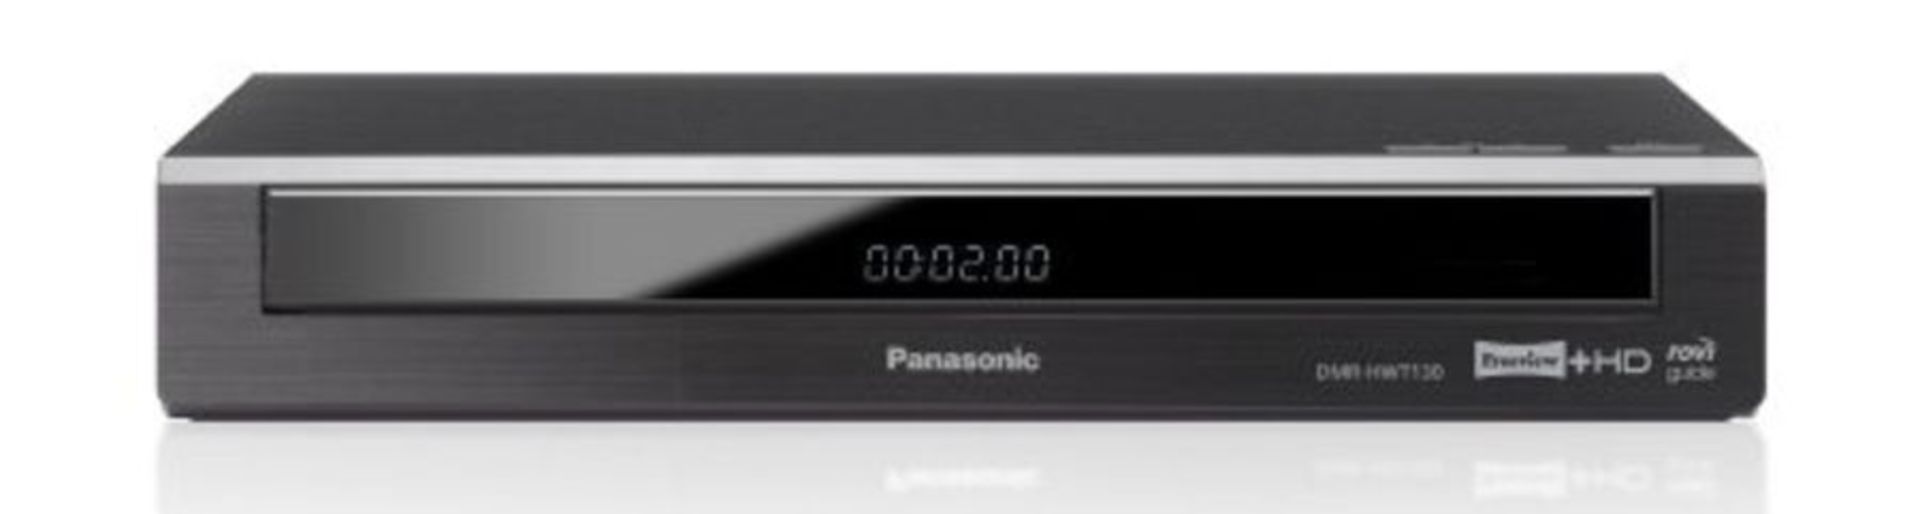 RRP £169.00 Panasonic DMR-HWT130EB Freeview+ HD Hard Disk Recorder with Twin HD Terrestrial Tuner, - Image 4 of 6